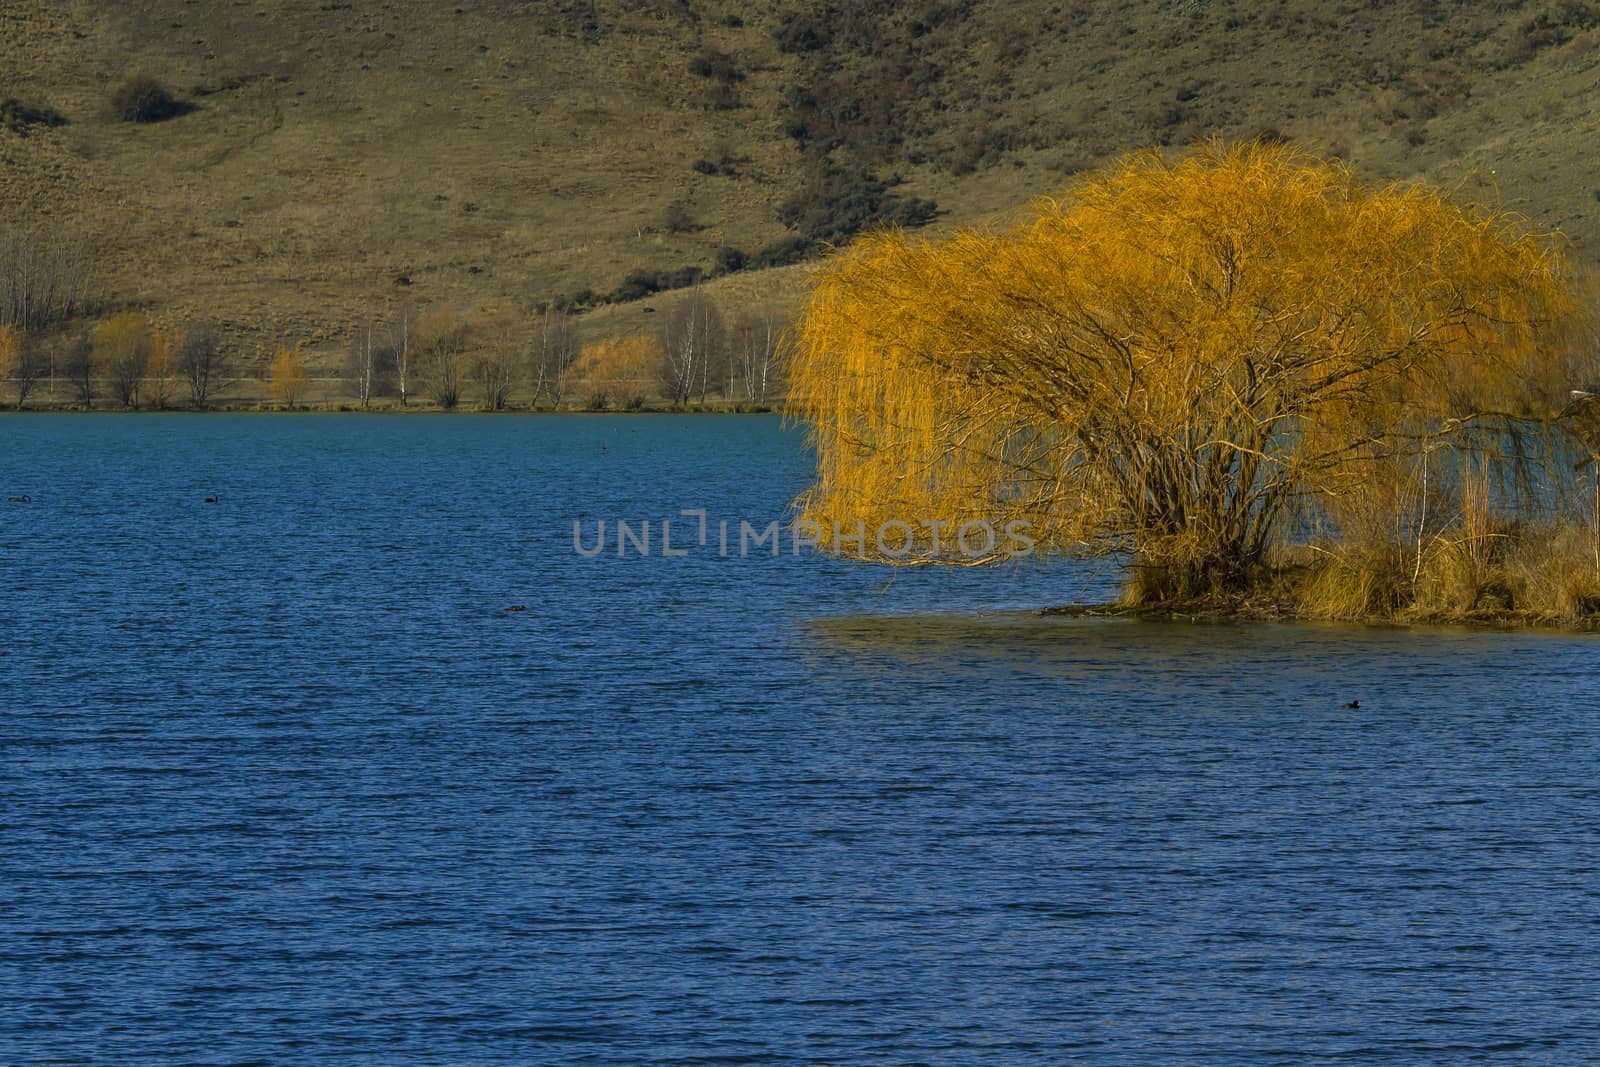 A tree on the lake bank in New Zealand